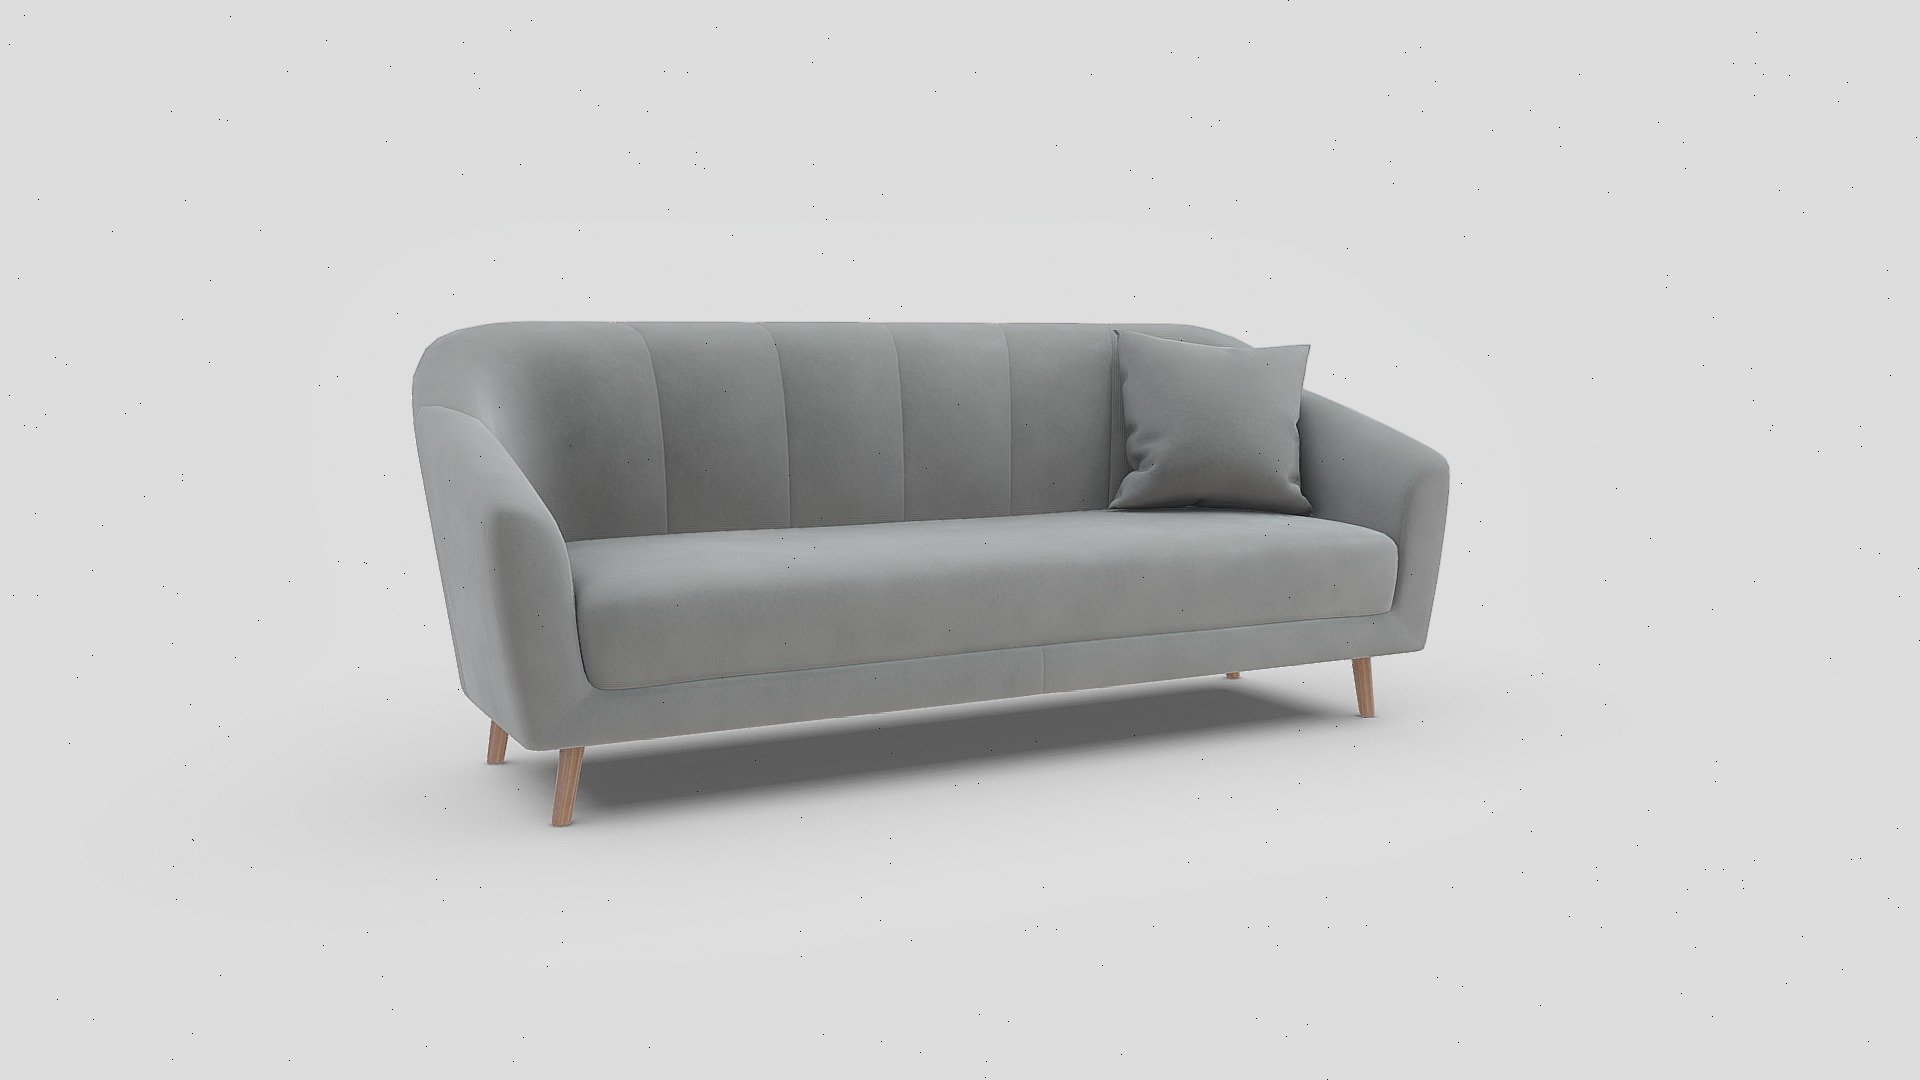 A high-Quality 3D asset of a modern couch; real-time visualization; highly optimized for augmented reality and virtual reality 

You may also like: https://sketchfab.com/3d-models/recliner-chair-83f569226bbc4b5fa824edab7ddcfac5

To learn more about products &amp; services go to:
Website: http://www.dreamerzlab.com
Like, Subscribe &amp; Follow:
Facebook: https://www.facebook.com/dreamerzlab
YouTube: https://www.youtube.com/channel/UCBxy&hellip;
Linkedin: https://www.linkedin.com/company/drea&hellip;
Twitter: https://twitter.com/dreamerz_lab
Instagram: https://www.instagram.com/dreamerzlabltd
Email: info@dreamerzlab.com 
Call: +8801675110479 - Couch - 3D model by Dreamerz Lab (@dreamerzlab) 3d model